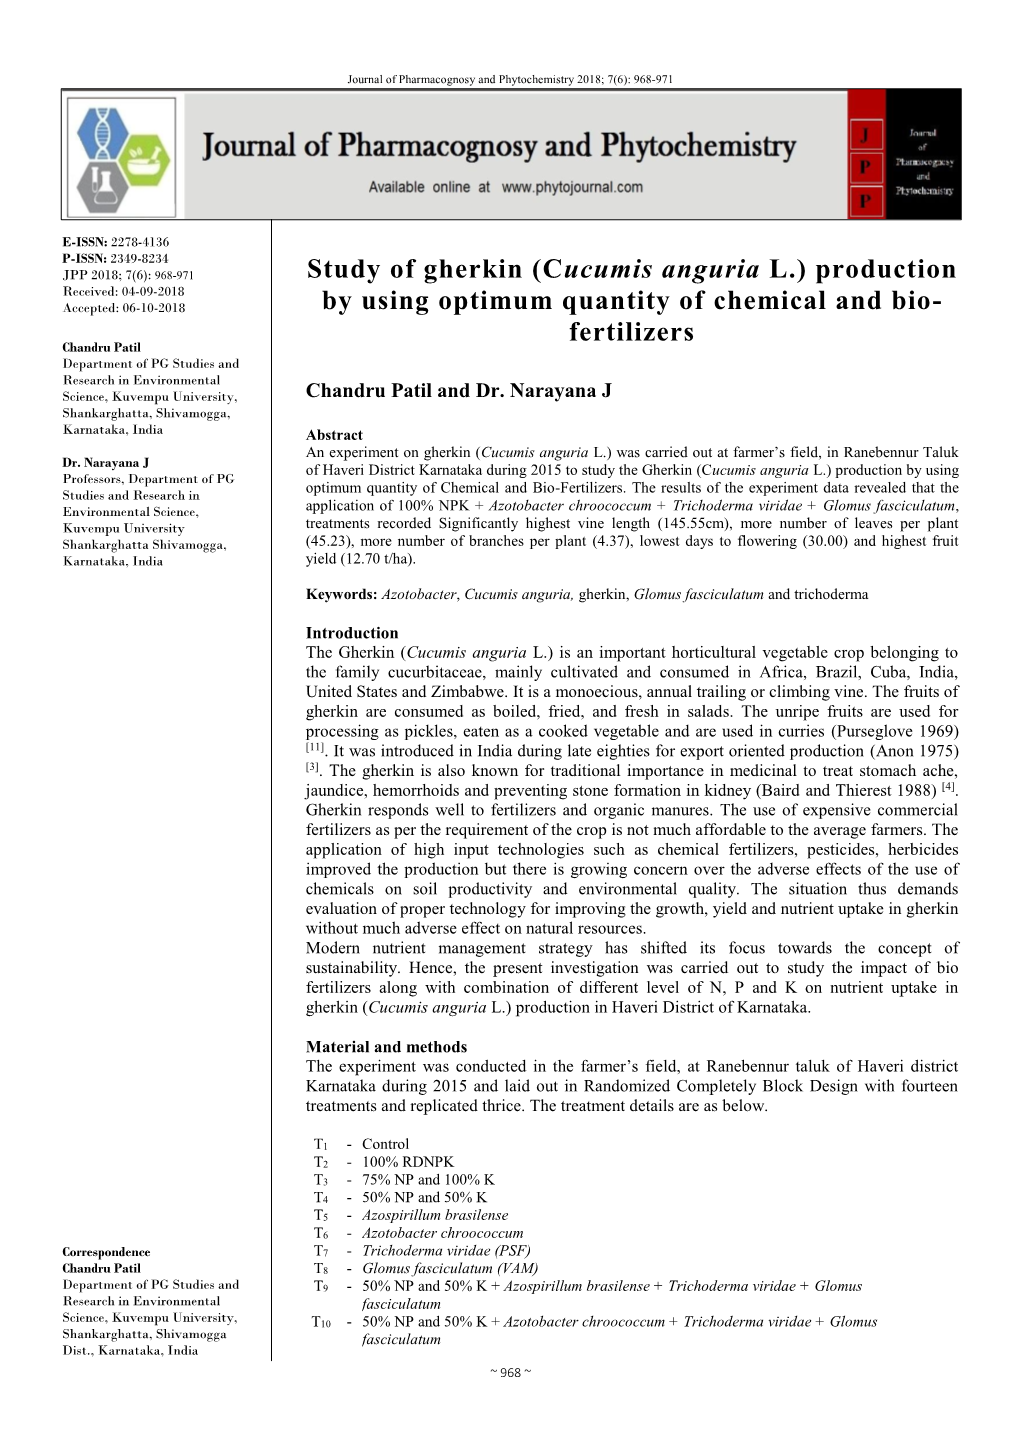 Study of Gherkin (Cucumis Anguria L.) Production by Using Optimum Quantity of Chemical and Bio- Fertilizers